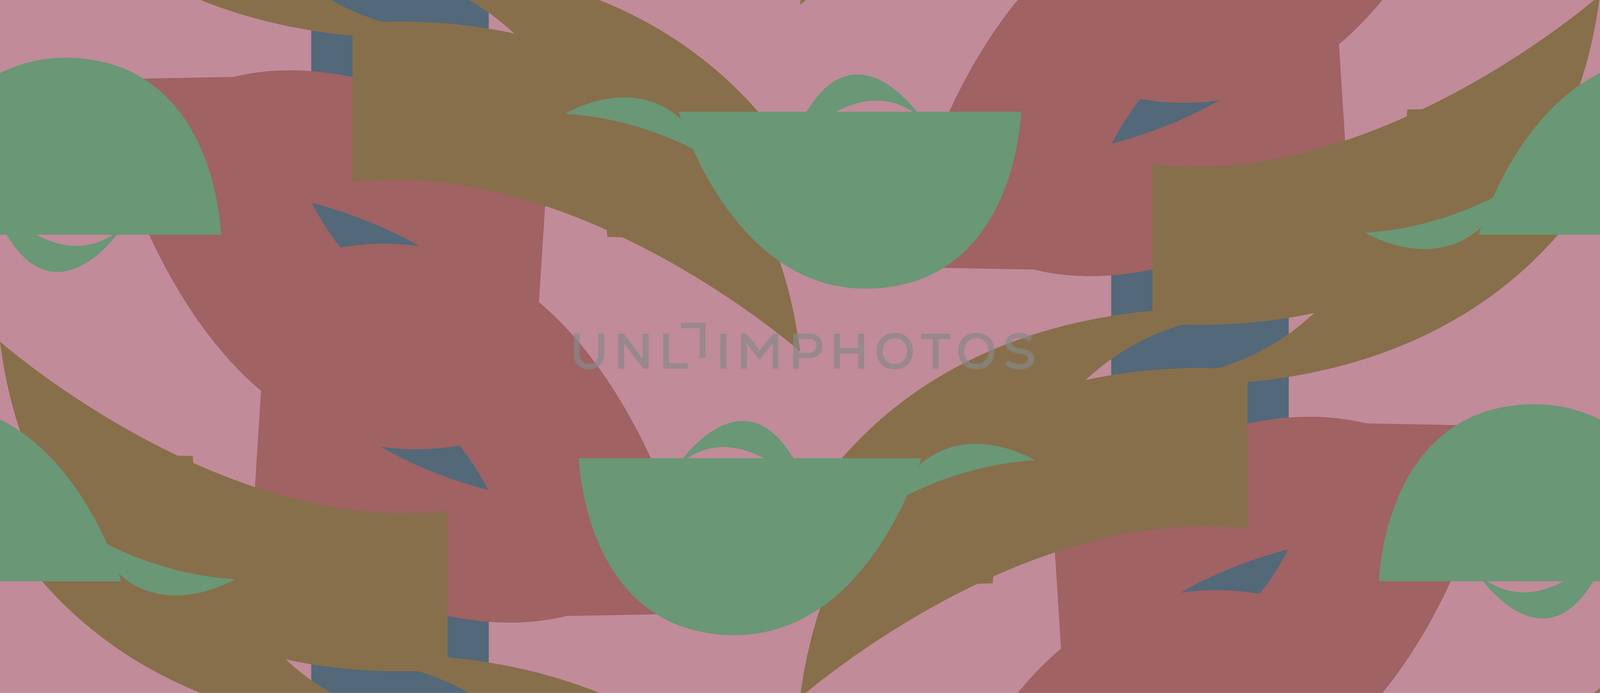 Seamless background pattern of green and brown shapes over pink